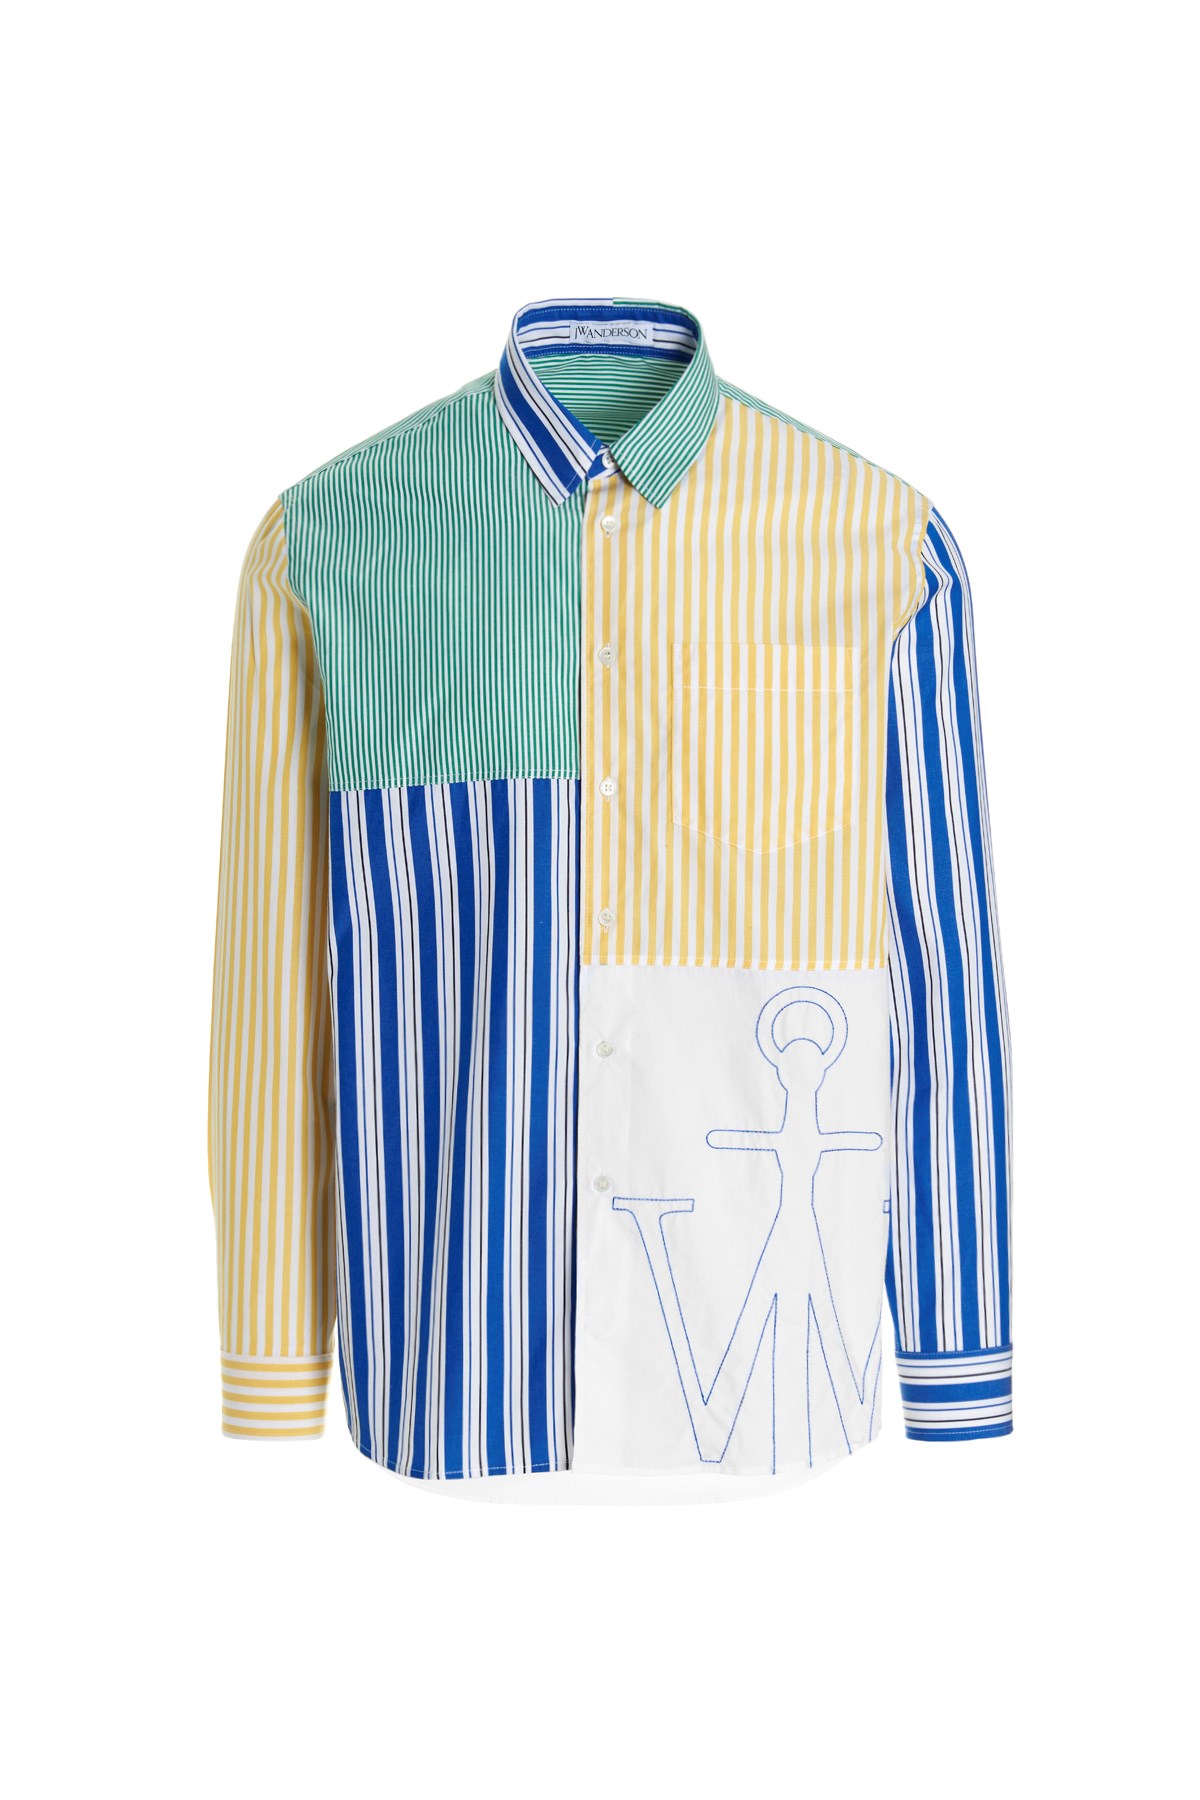 J.W.ANDERSON 'Patchwork' Shirt